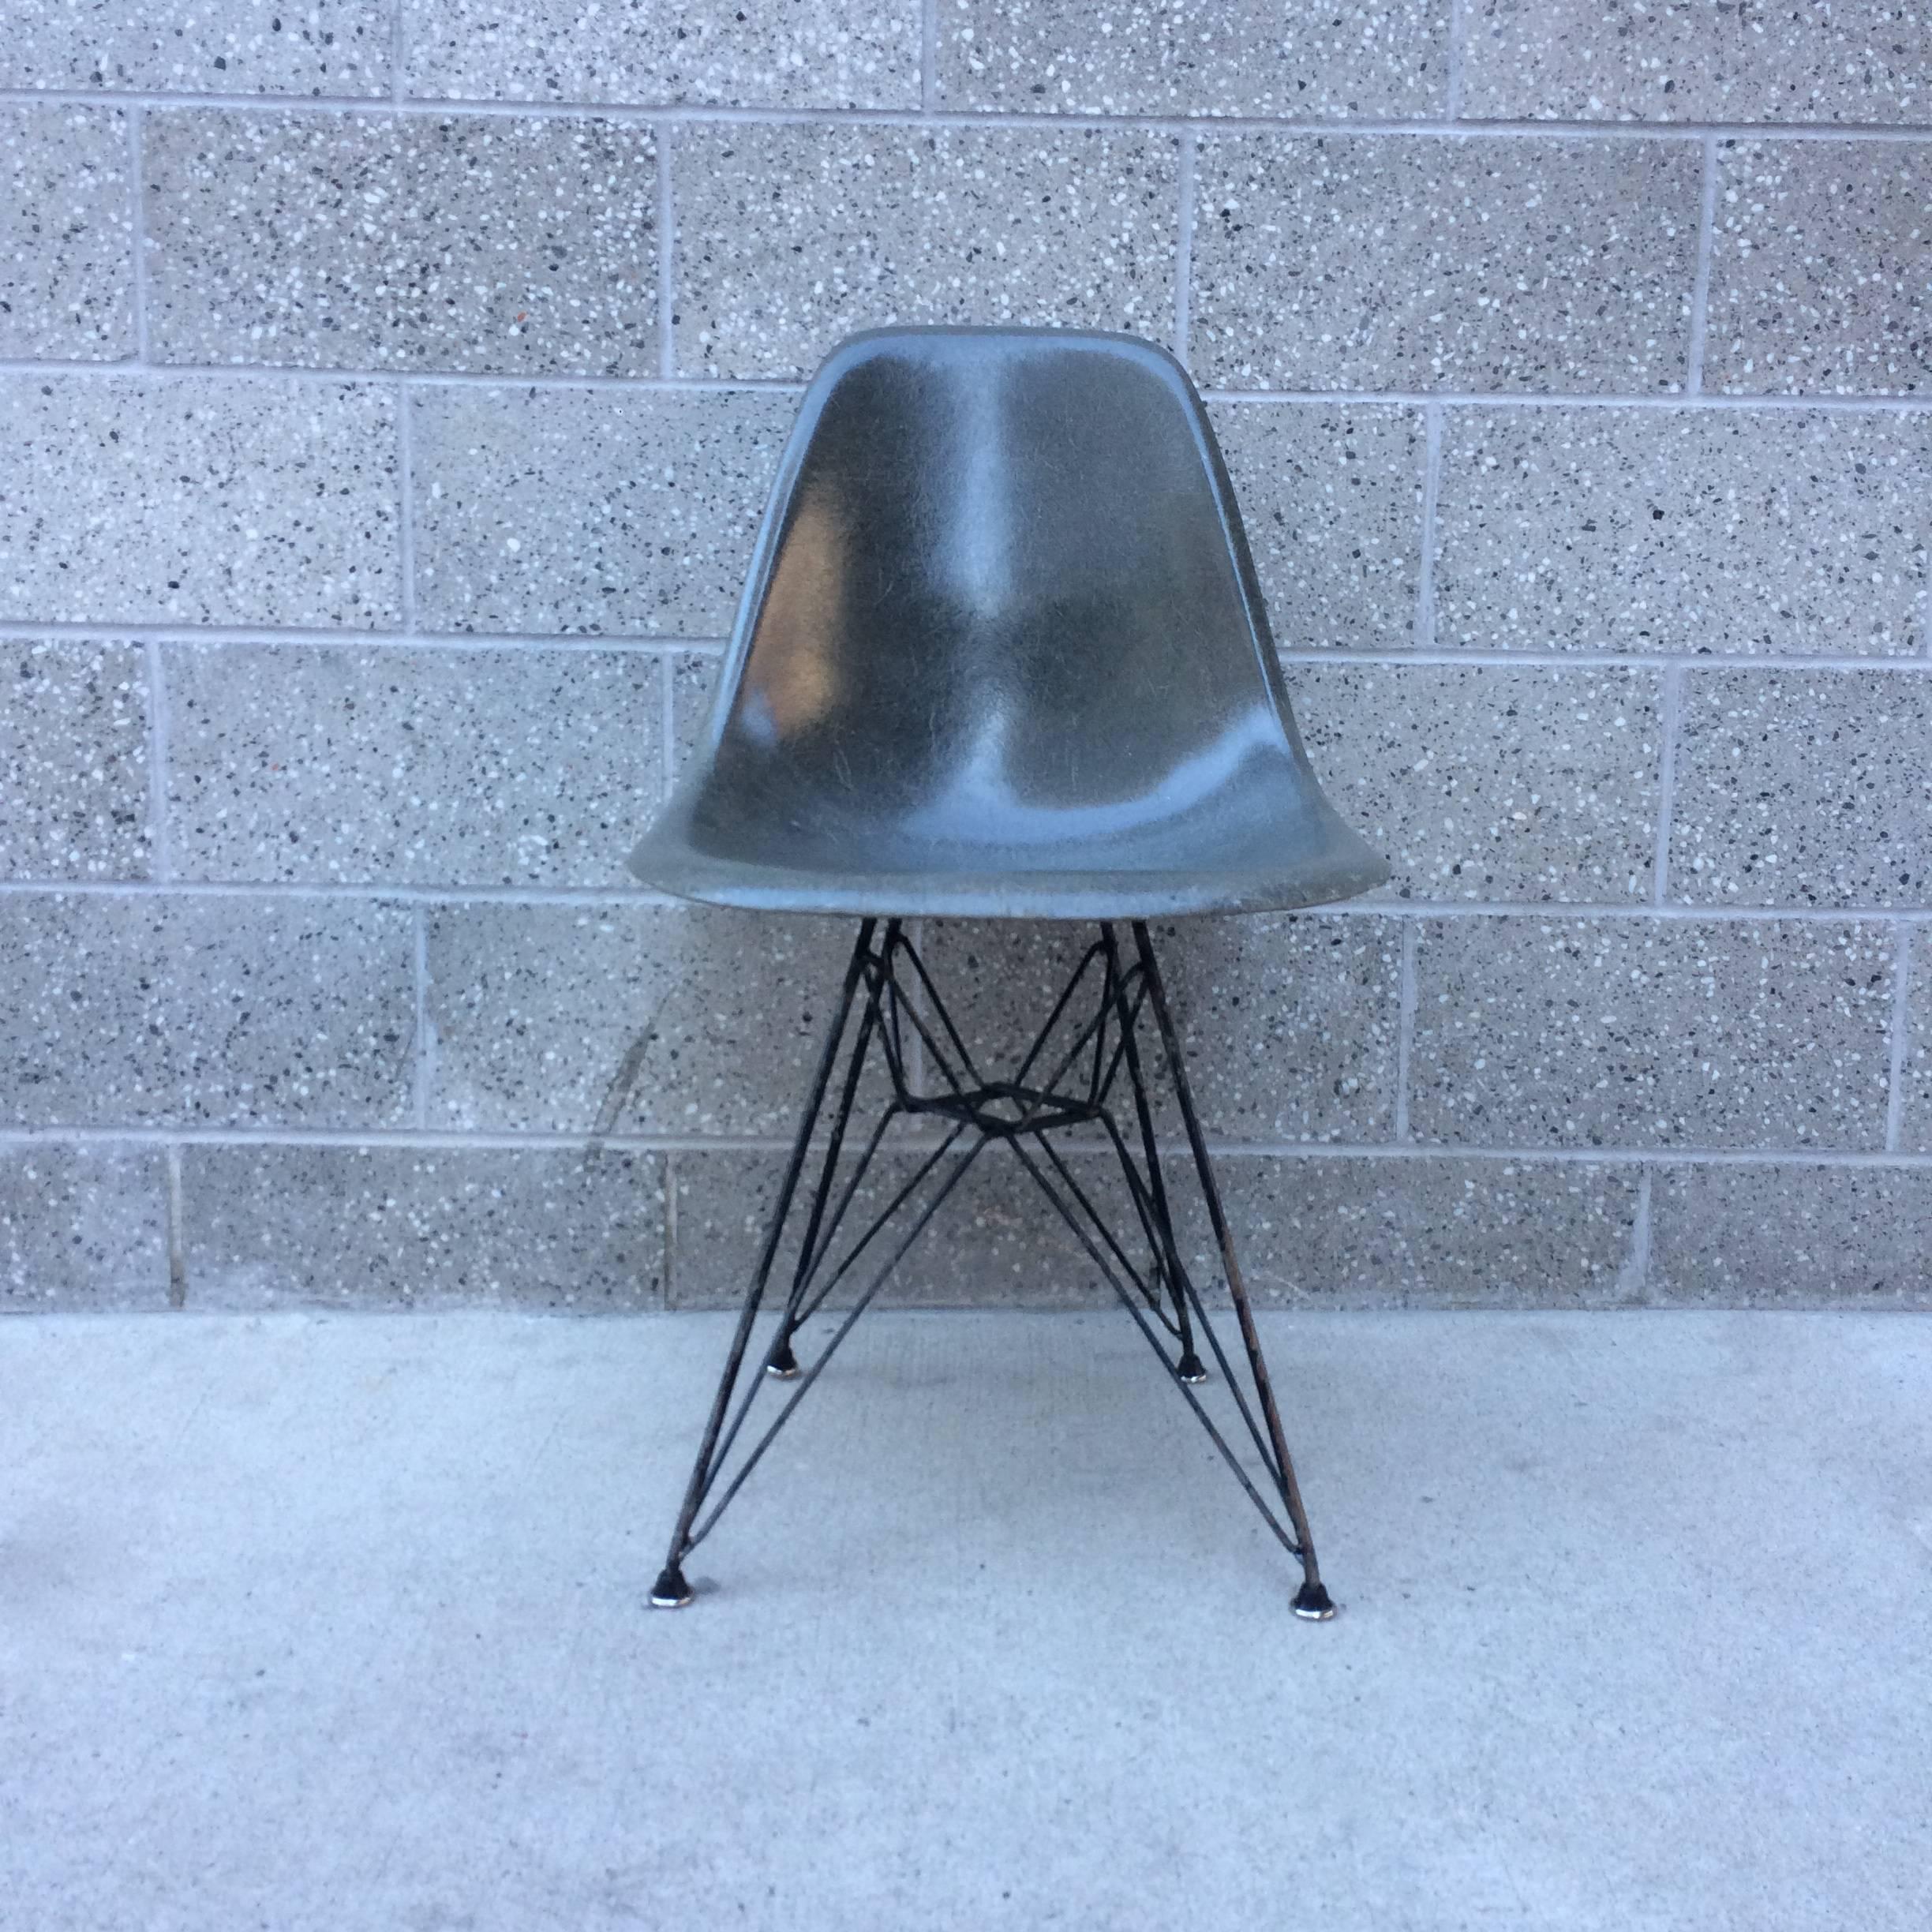 Herman Miller Eames DSR fiberglass chair on Eiffel base in elephant hide grey. Chair dates to 1961. Base has excellent patina and new glides. No structural issues. Original shock mounts. Normal wear commensurate with age and use.